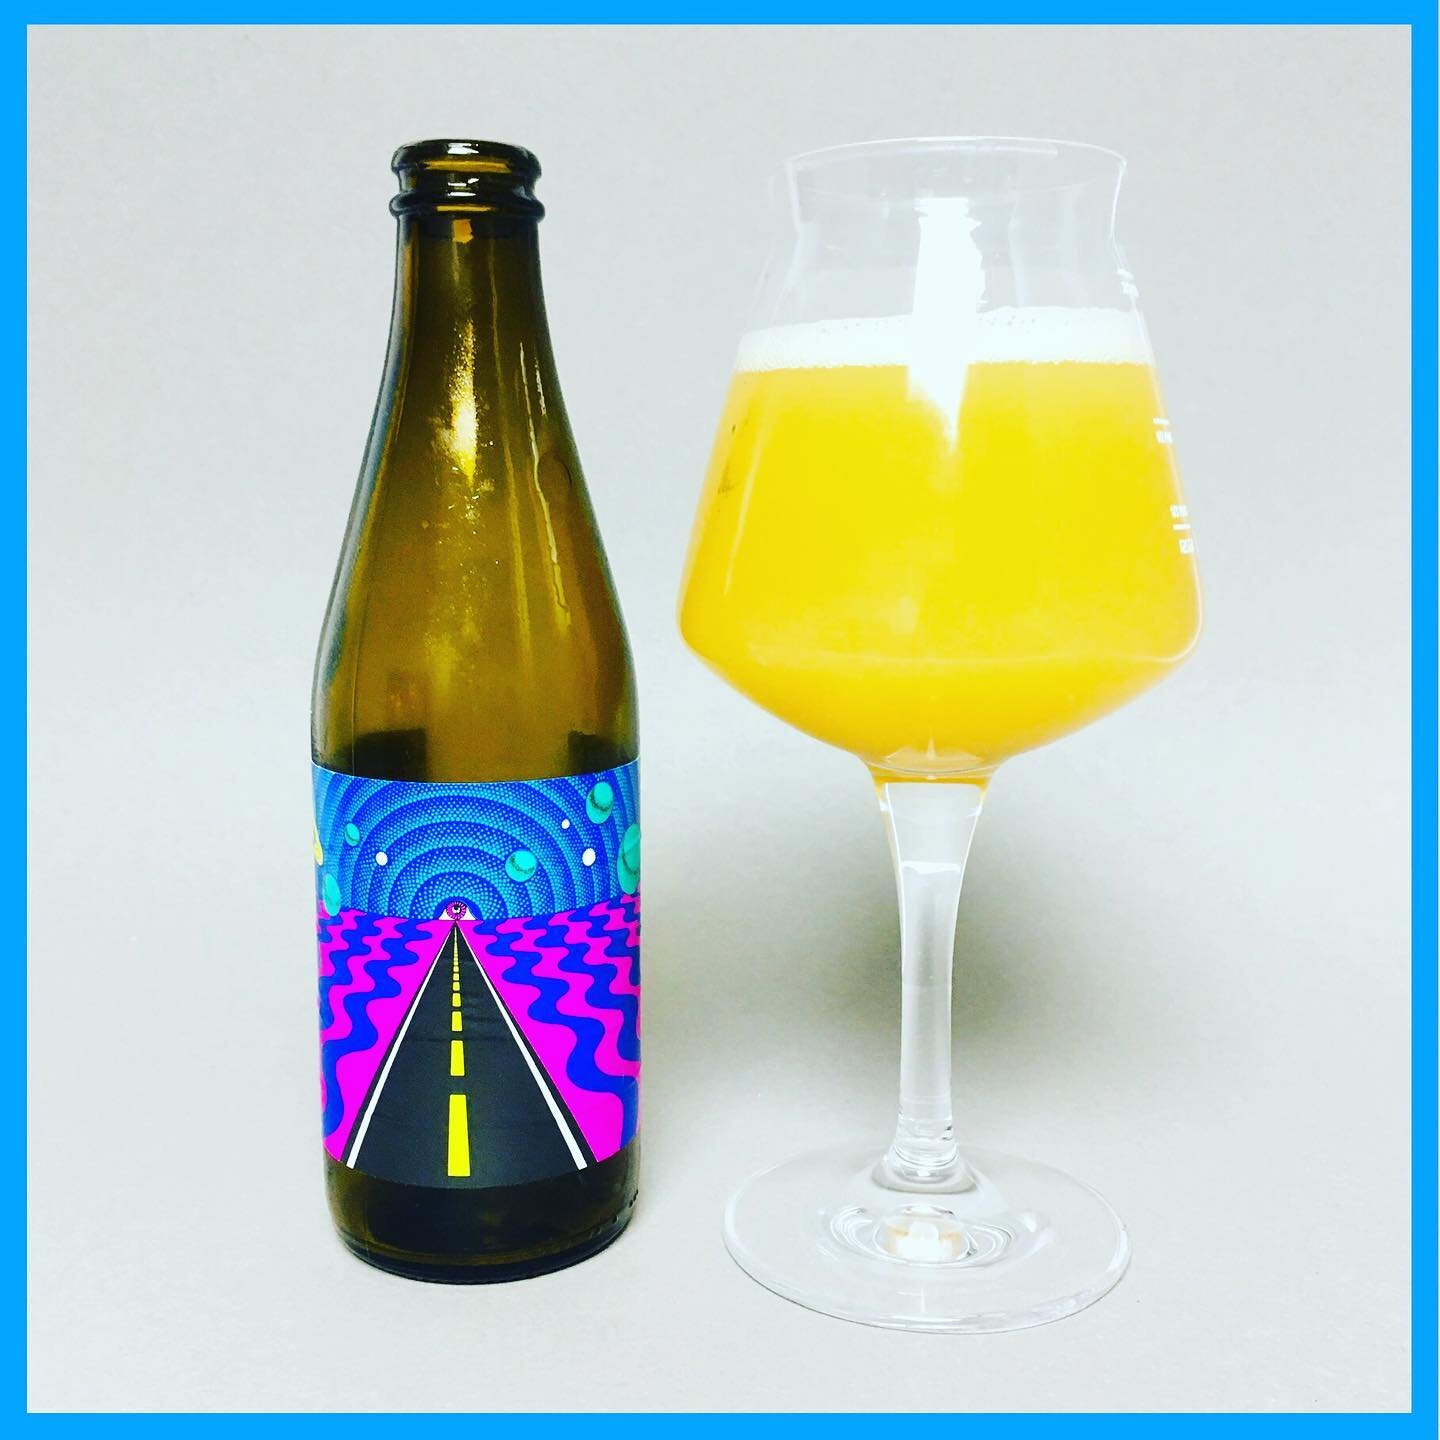 Well we&rsquo;re back on the #staffperks hype after a couple of busy weeks serving you all some great beer! 

🛸👽 @omnipollo 👽🛸 Empyrean DIPA. What an amazing juice bomb Double IPA from the Swedish kings of brewing. Huge mango and papaya flavours 